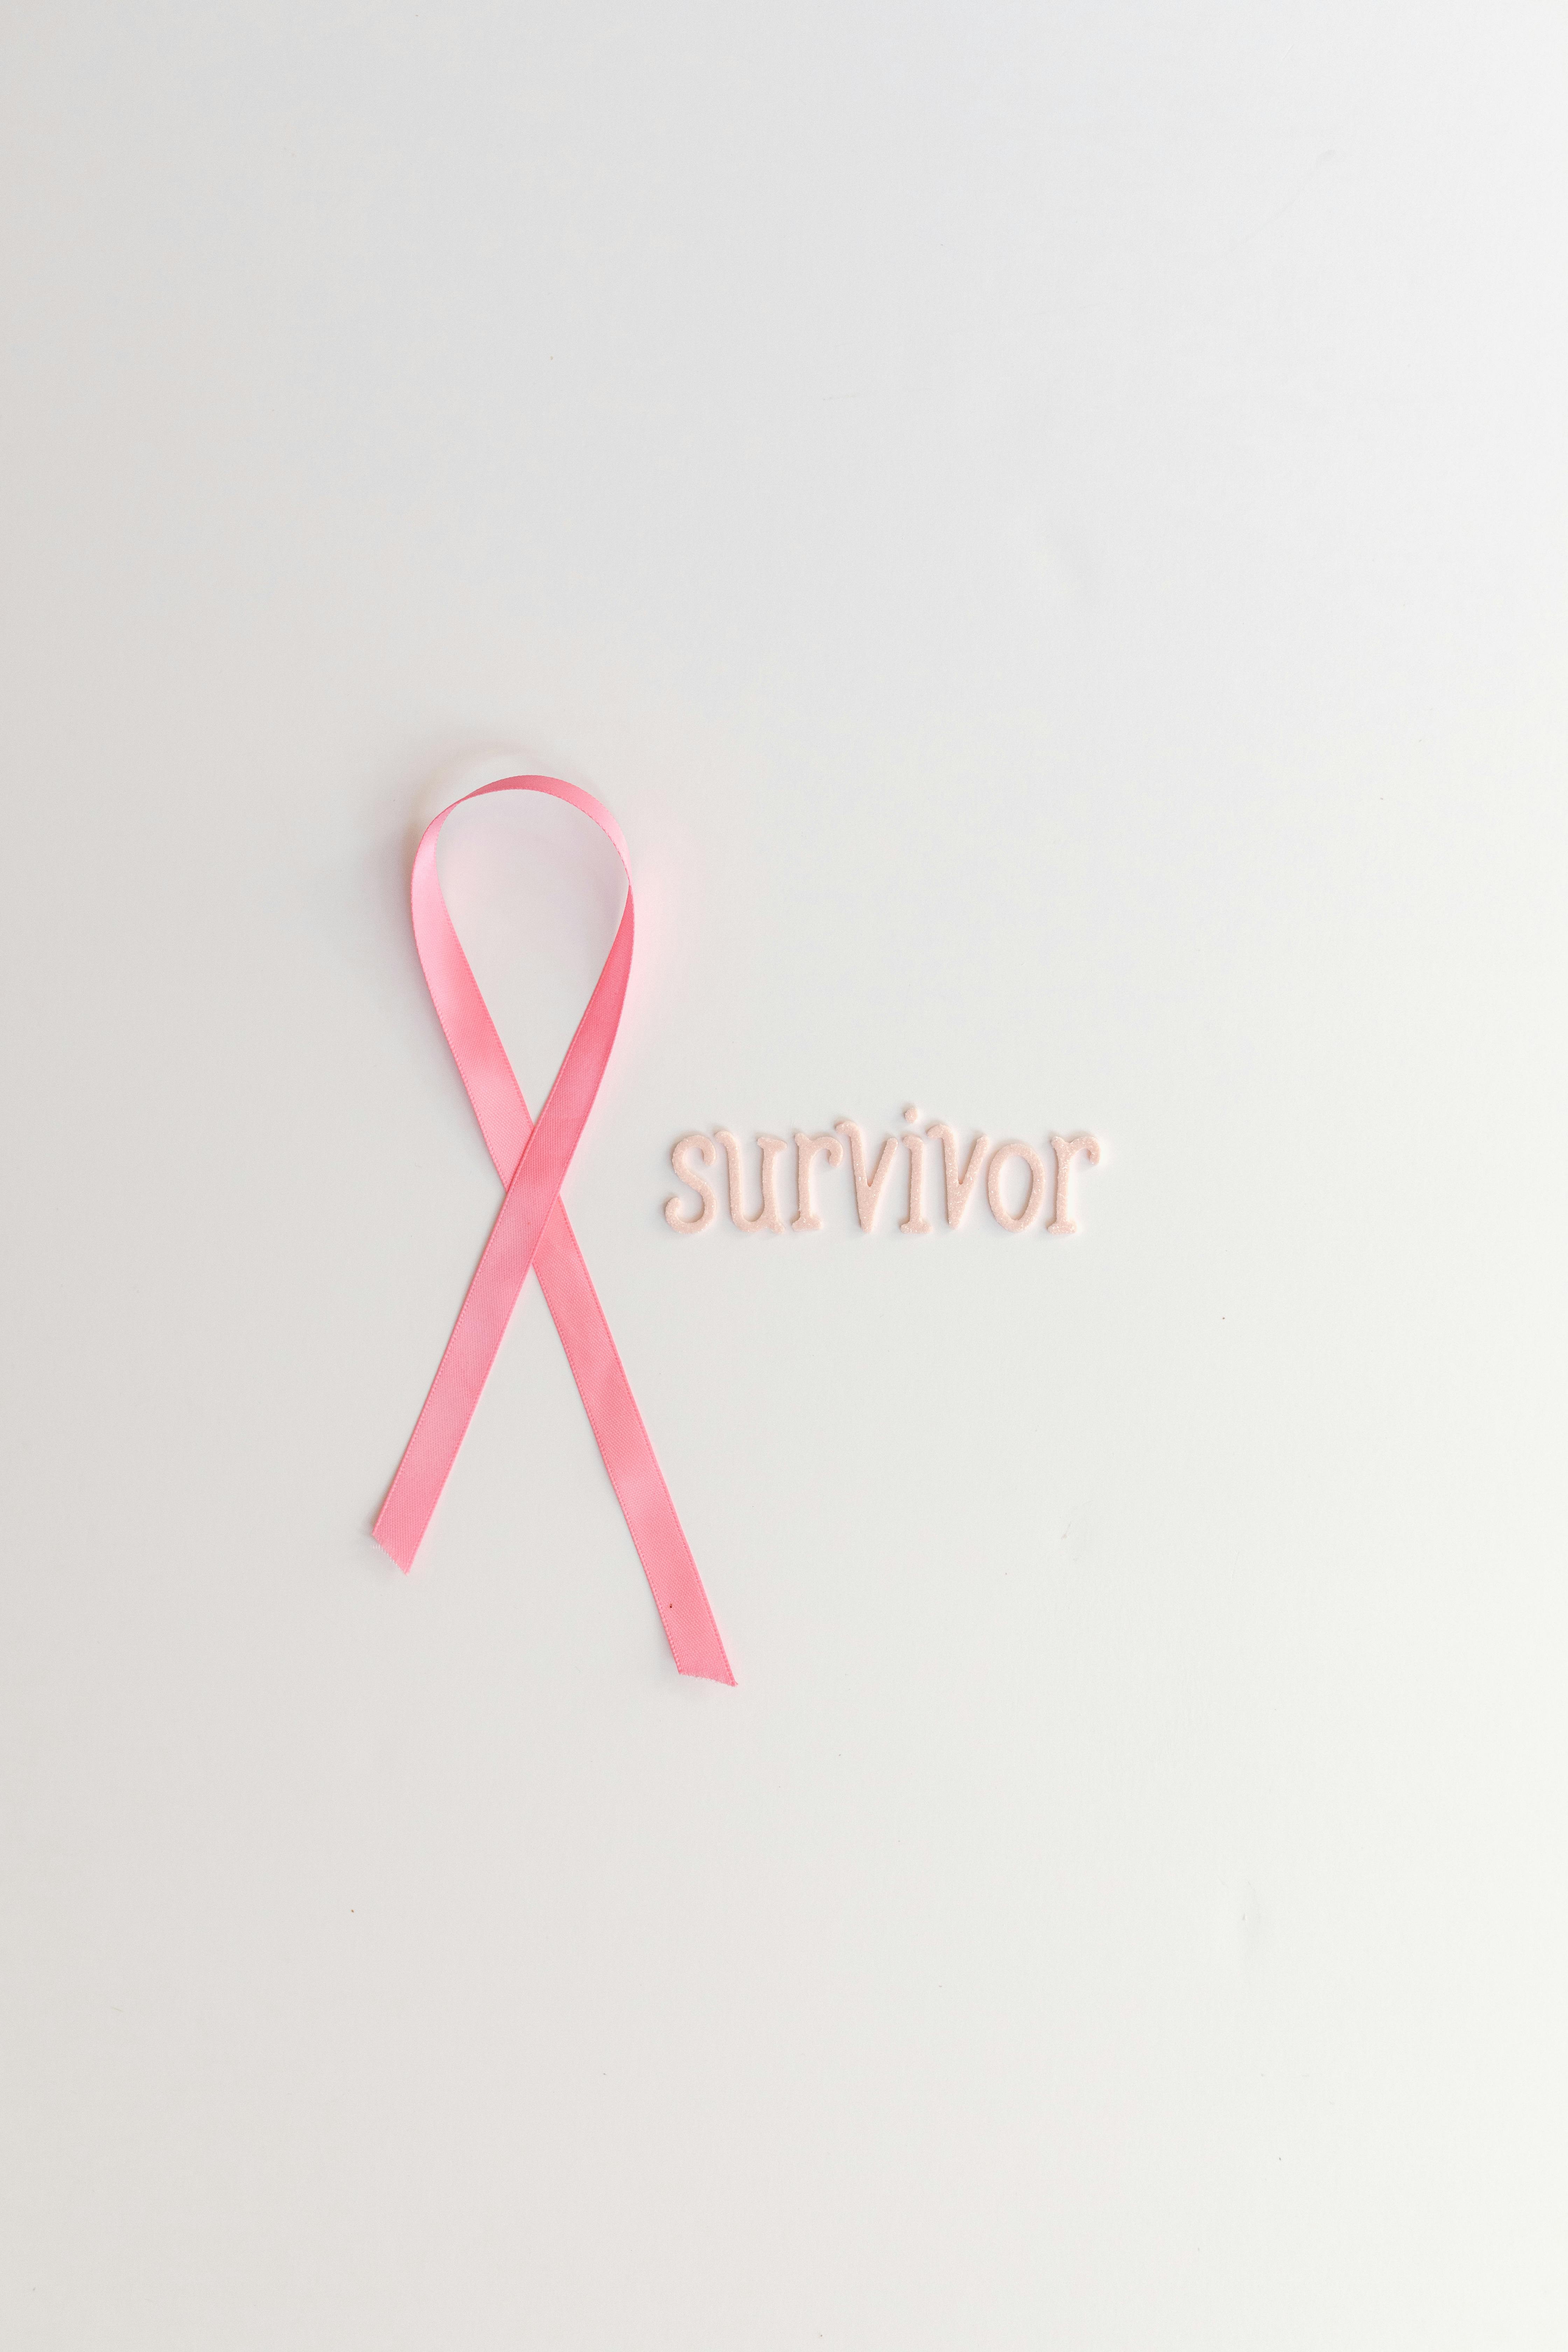 Download Hand Holding Ribbon Breast Cancer Awareness Wallpaper  Wallpapers com